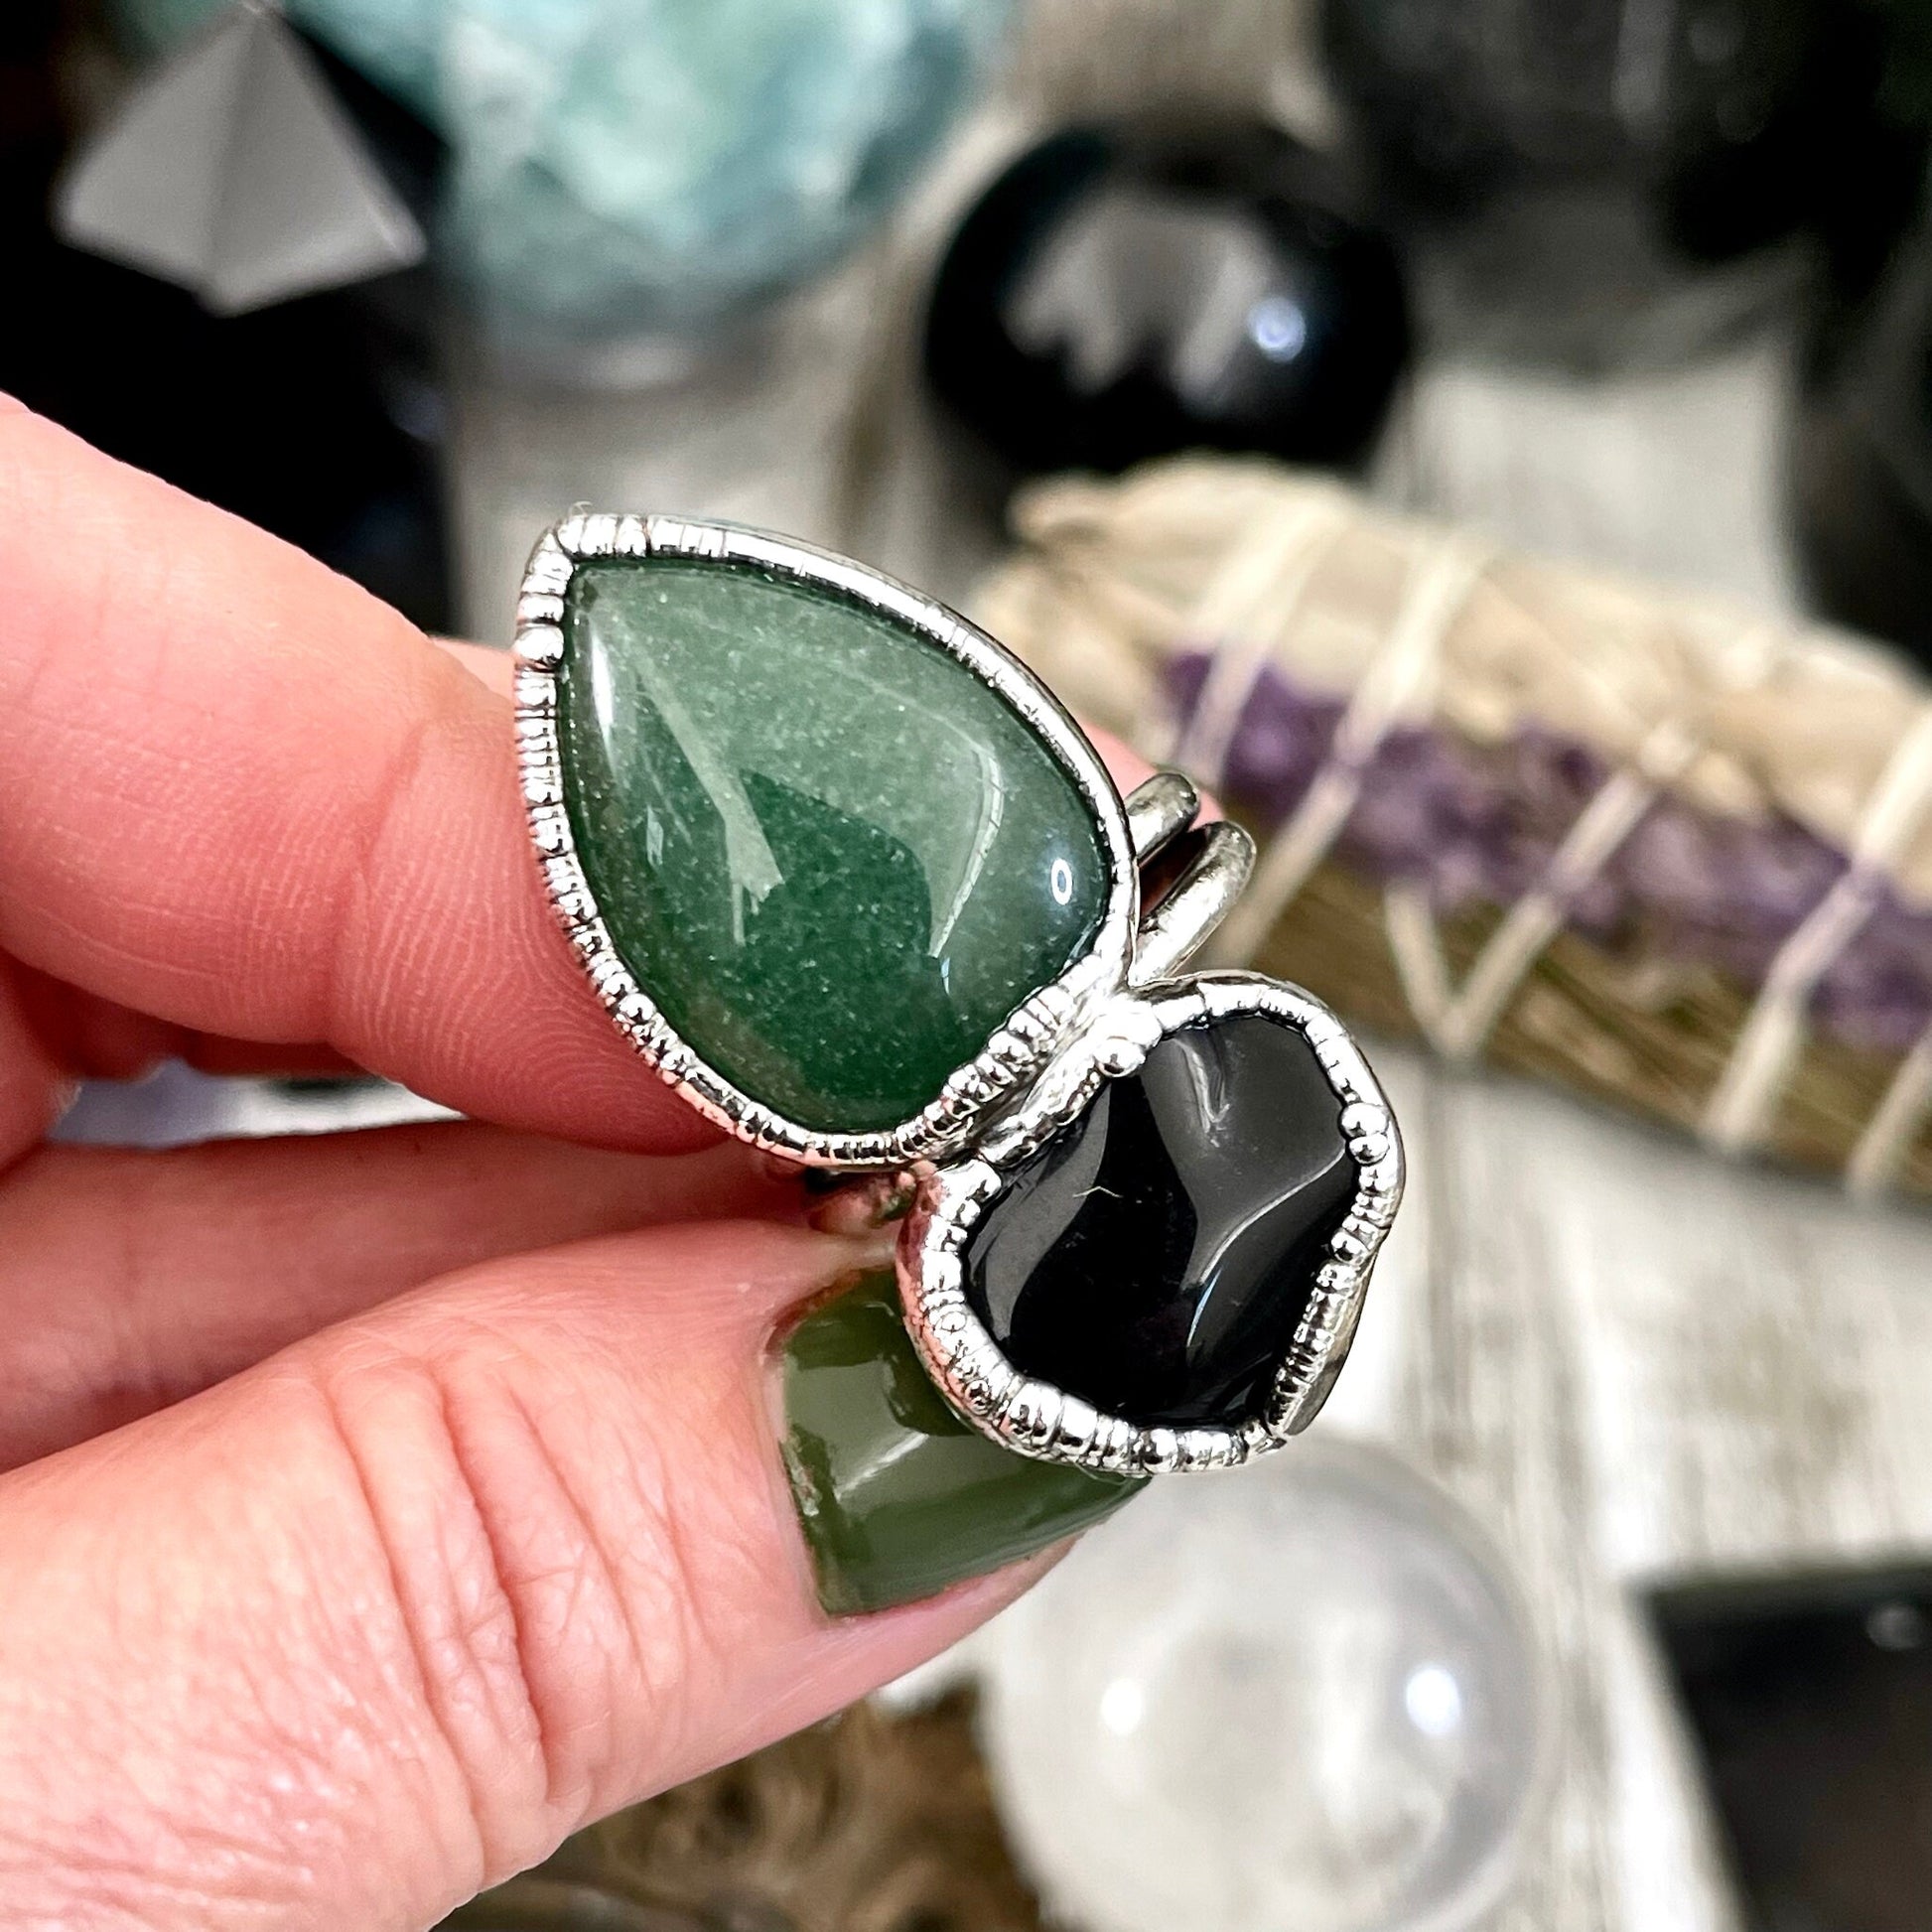 Size 8.5 Two Stone Ring- Black Onyx Green Aventurine Crystal Ring Fine Silver / Foxlark Collection - One of a Kind / Statement Jewelry